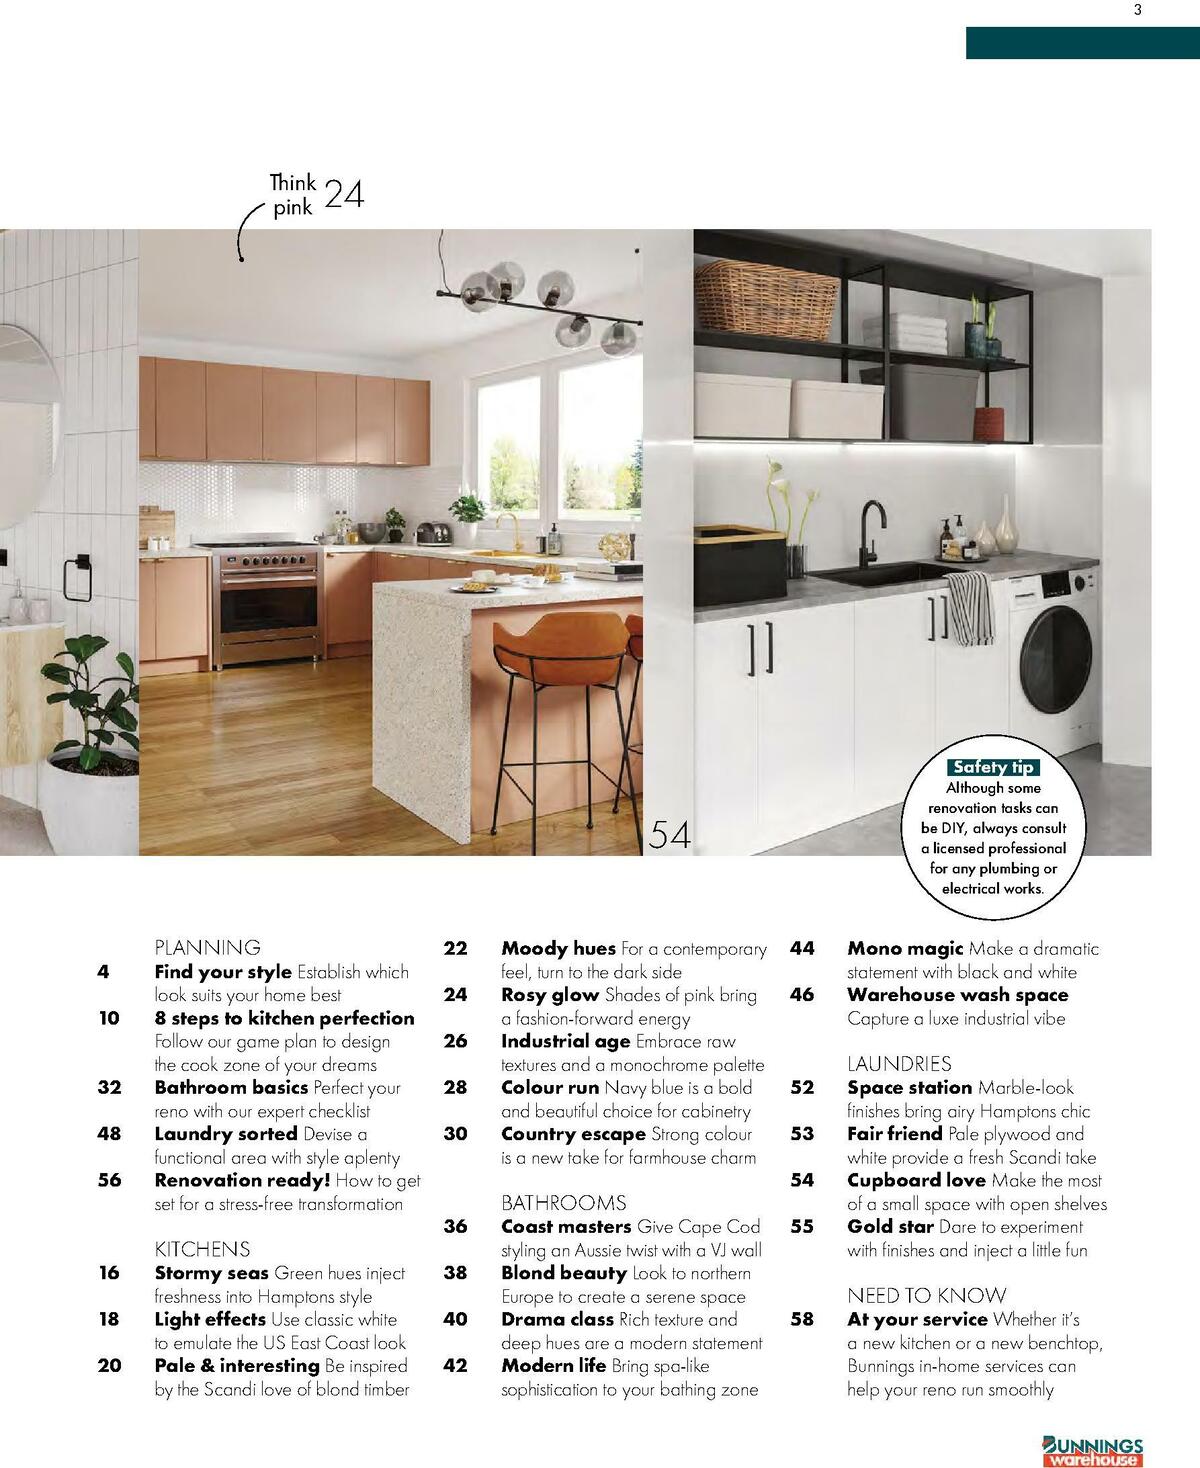 Bunnings Warehouse Kitchens, Bathrooms and Laundries 2021-22 Catalogues from 1 July